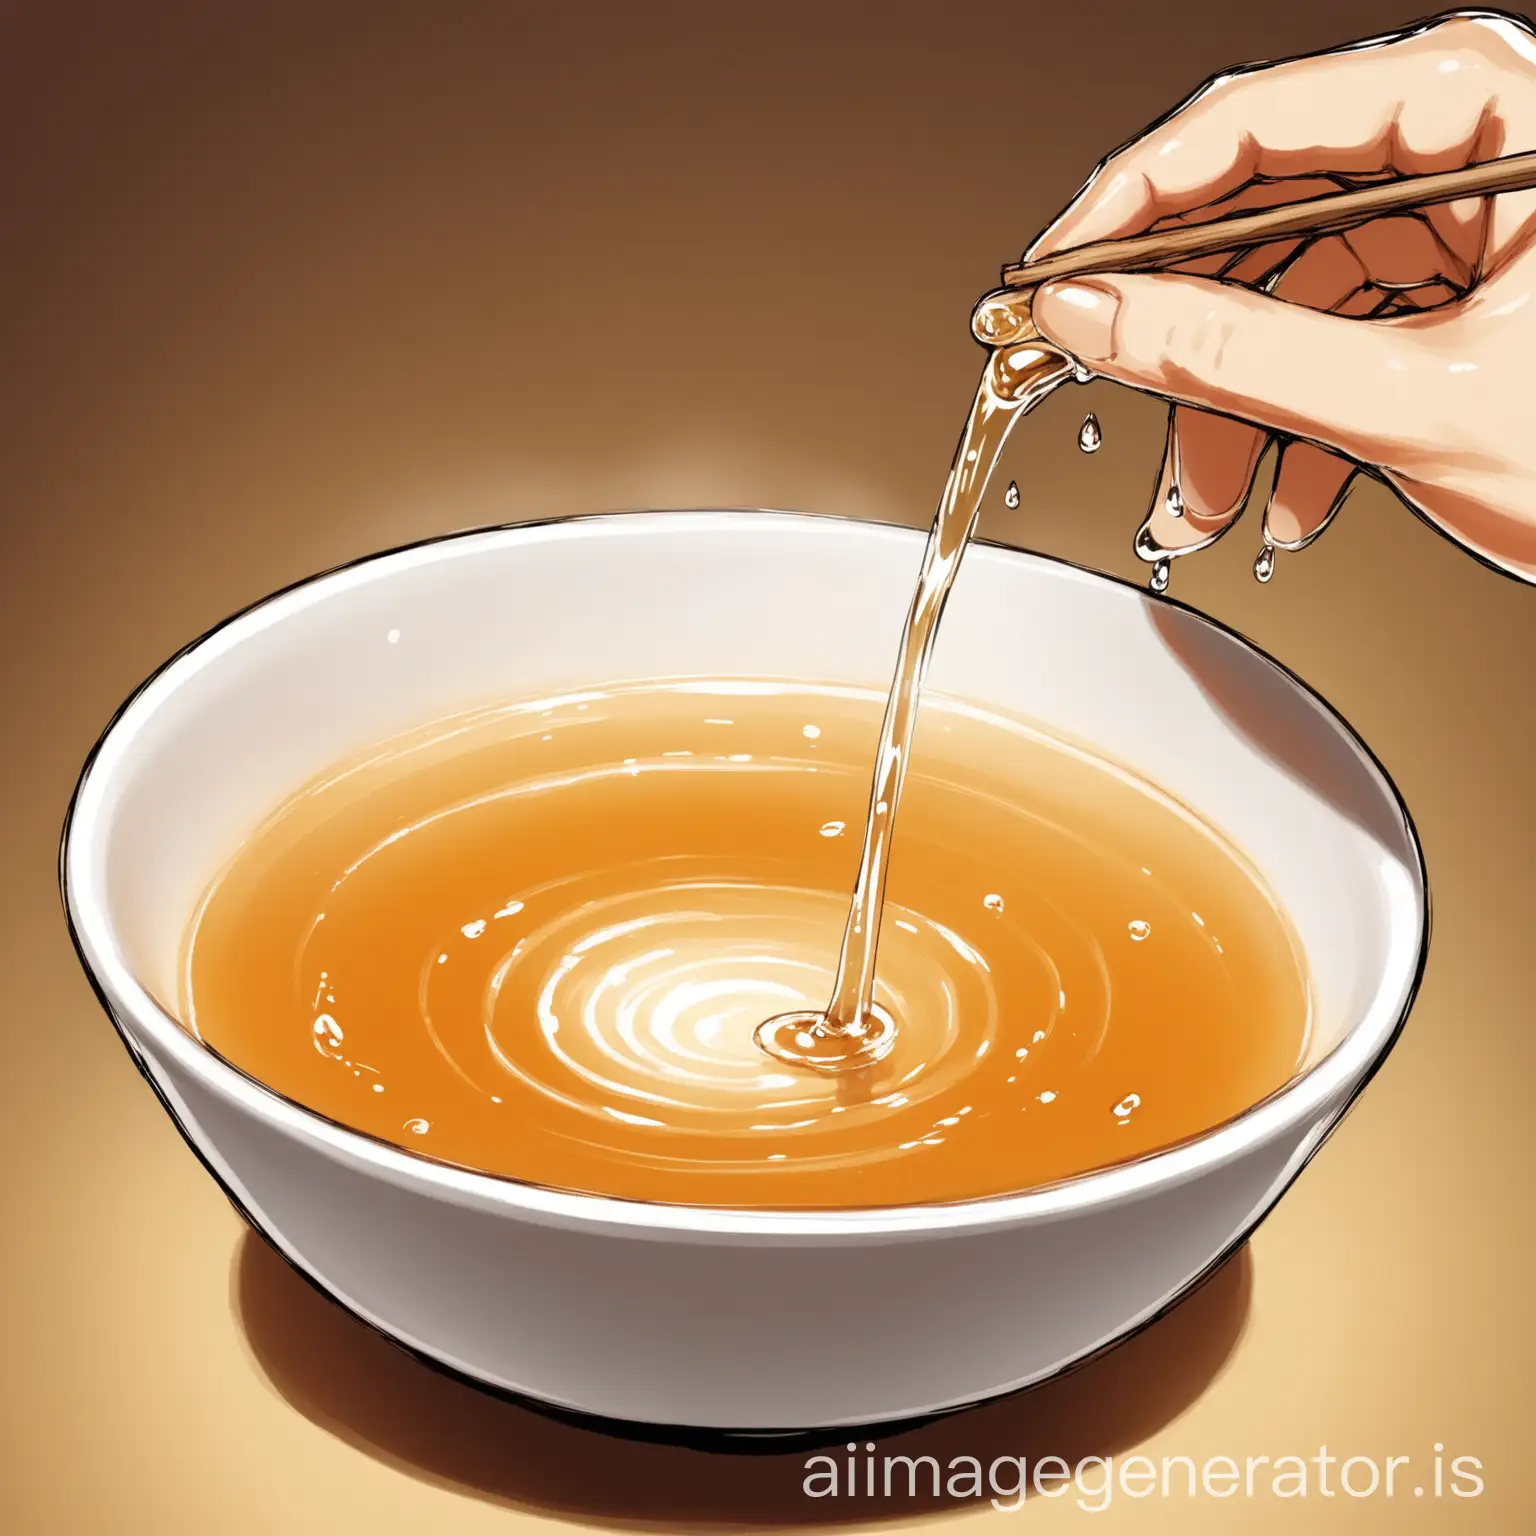 Traditional-Chinese-Medicine-Ginseng-Dripping-into-Soup